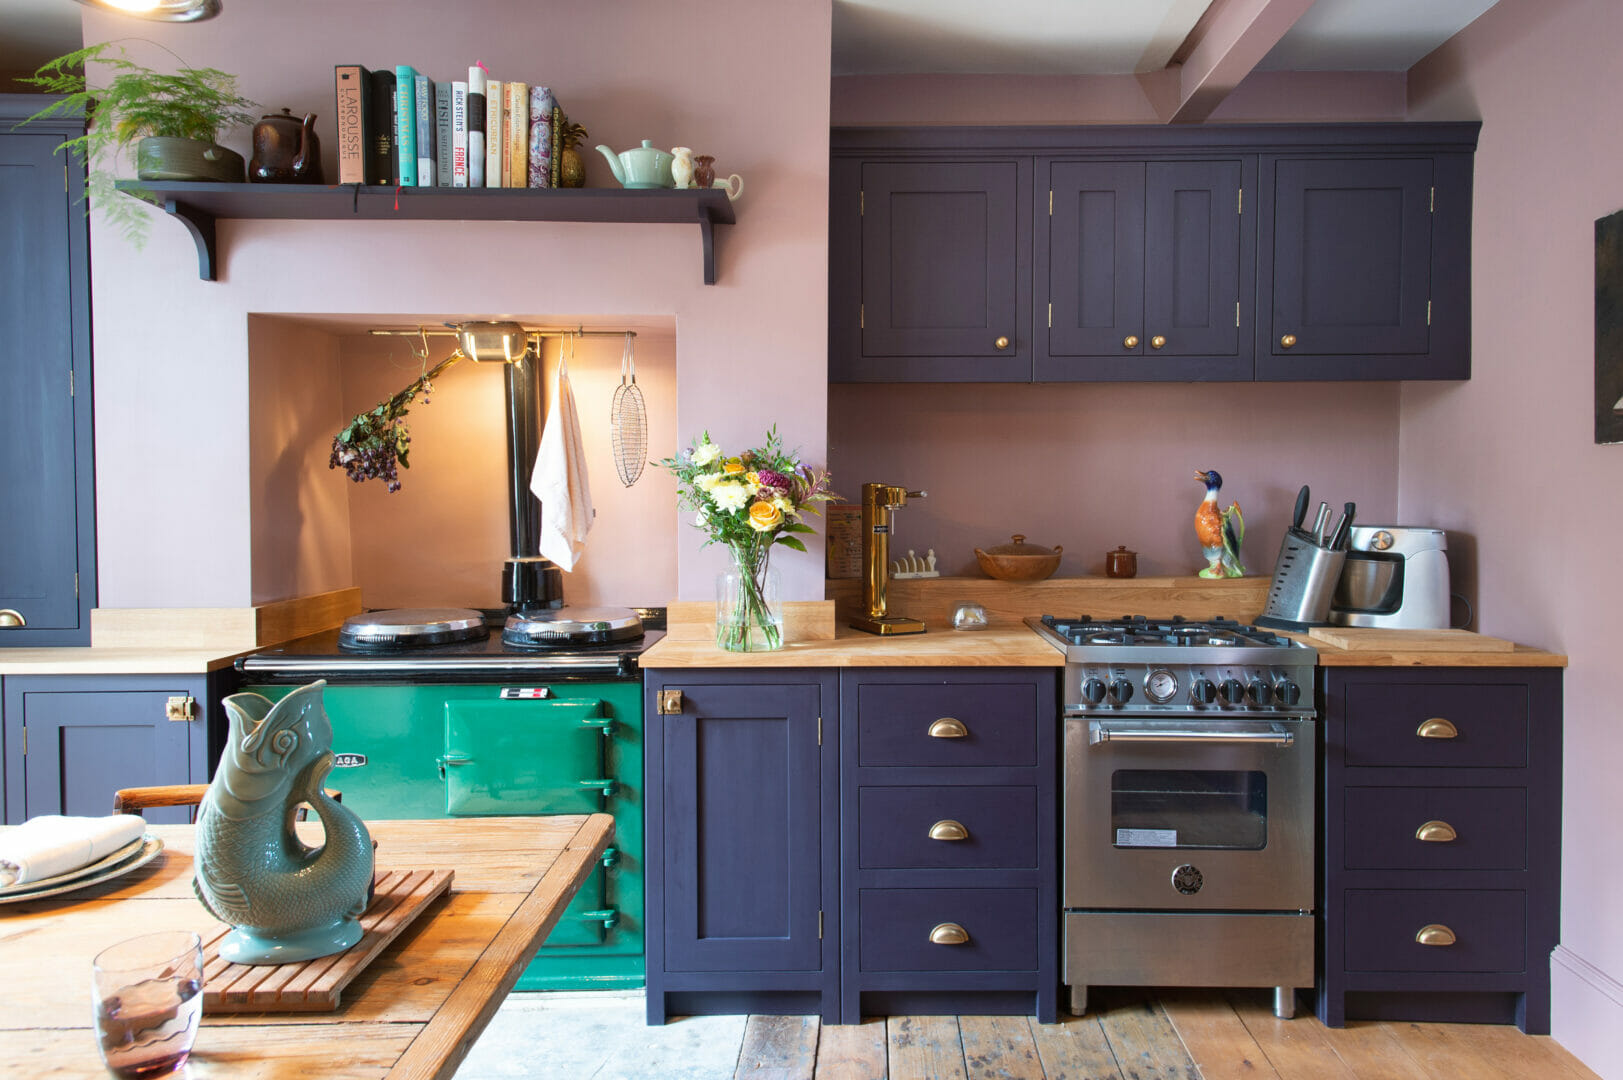 Inspiration and ideas for a kitchen colour scheme in Farrow & Ball's Hague  Blue. Cabinets with brass handl…